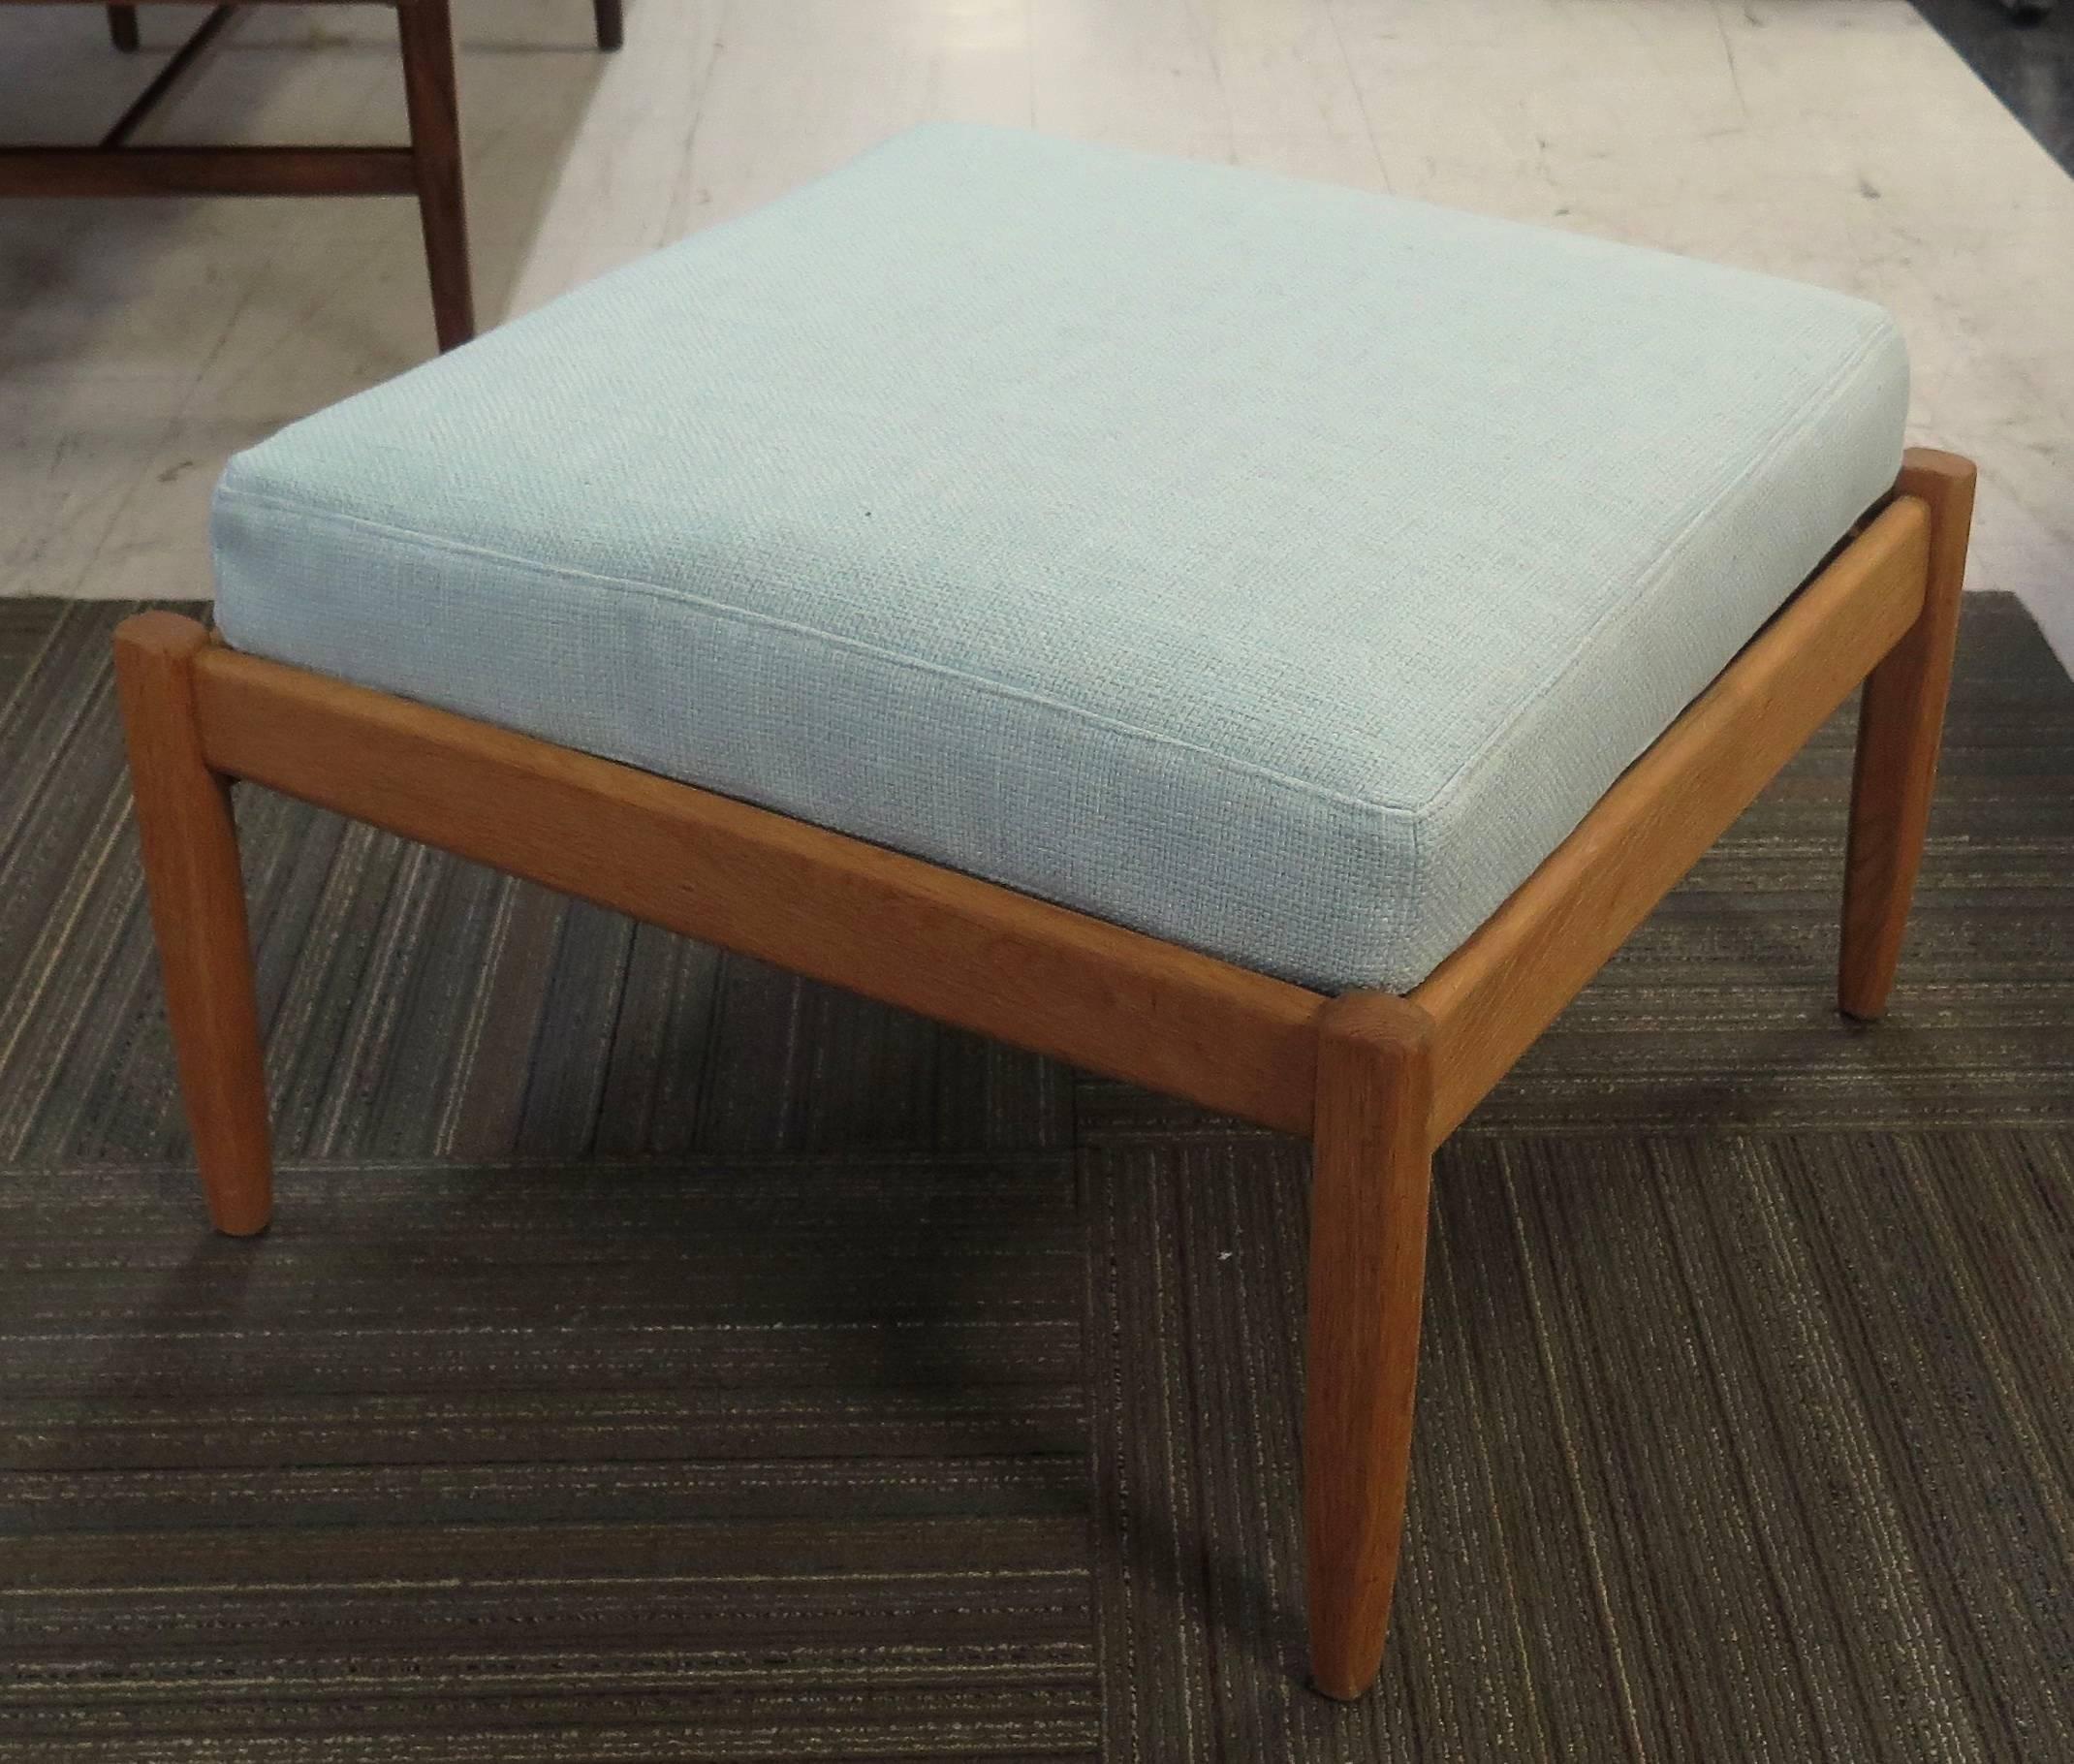 Nice set of stacking ottomans. Oak frames. All with new strapping, foam and fabric. Fabric color is Aruba by Greenhouse Fabrics. Could also be configured with all three together as bench seating.

